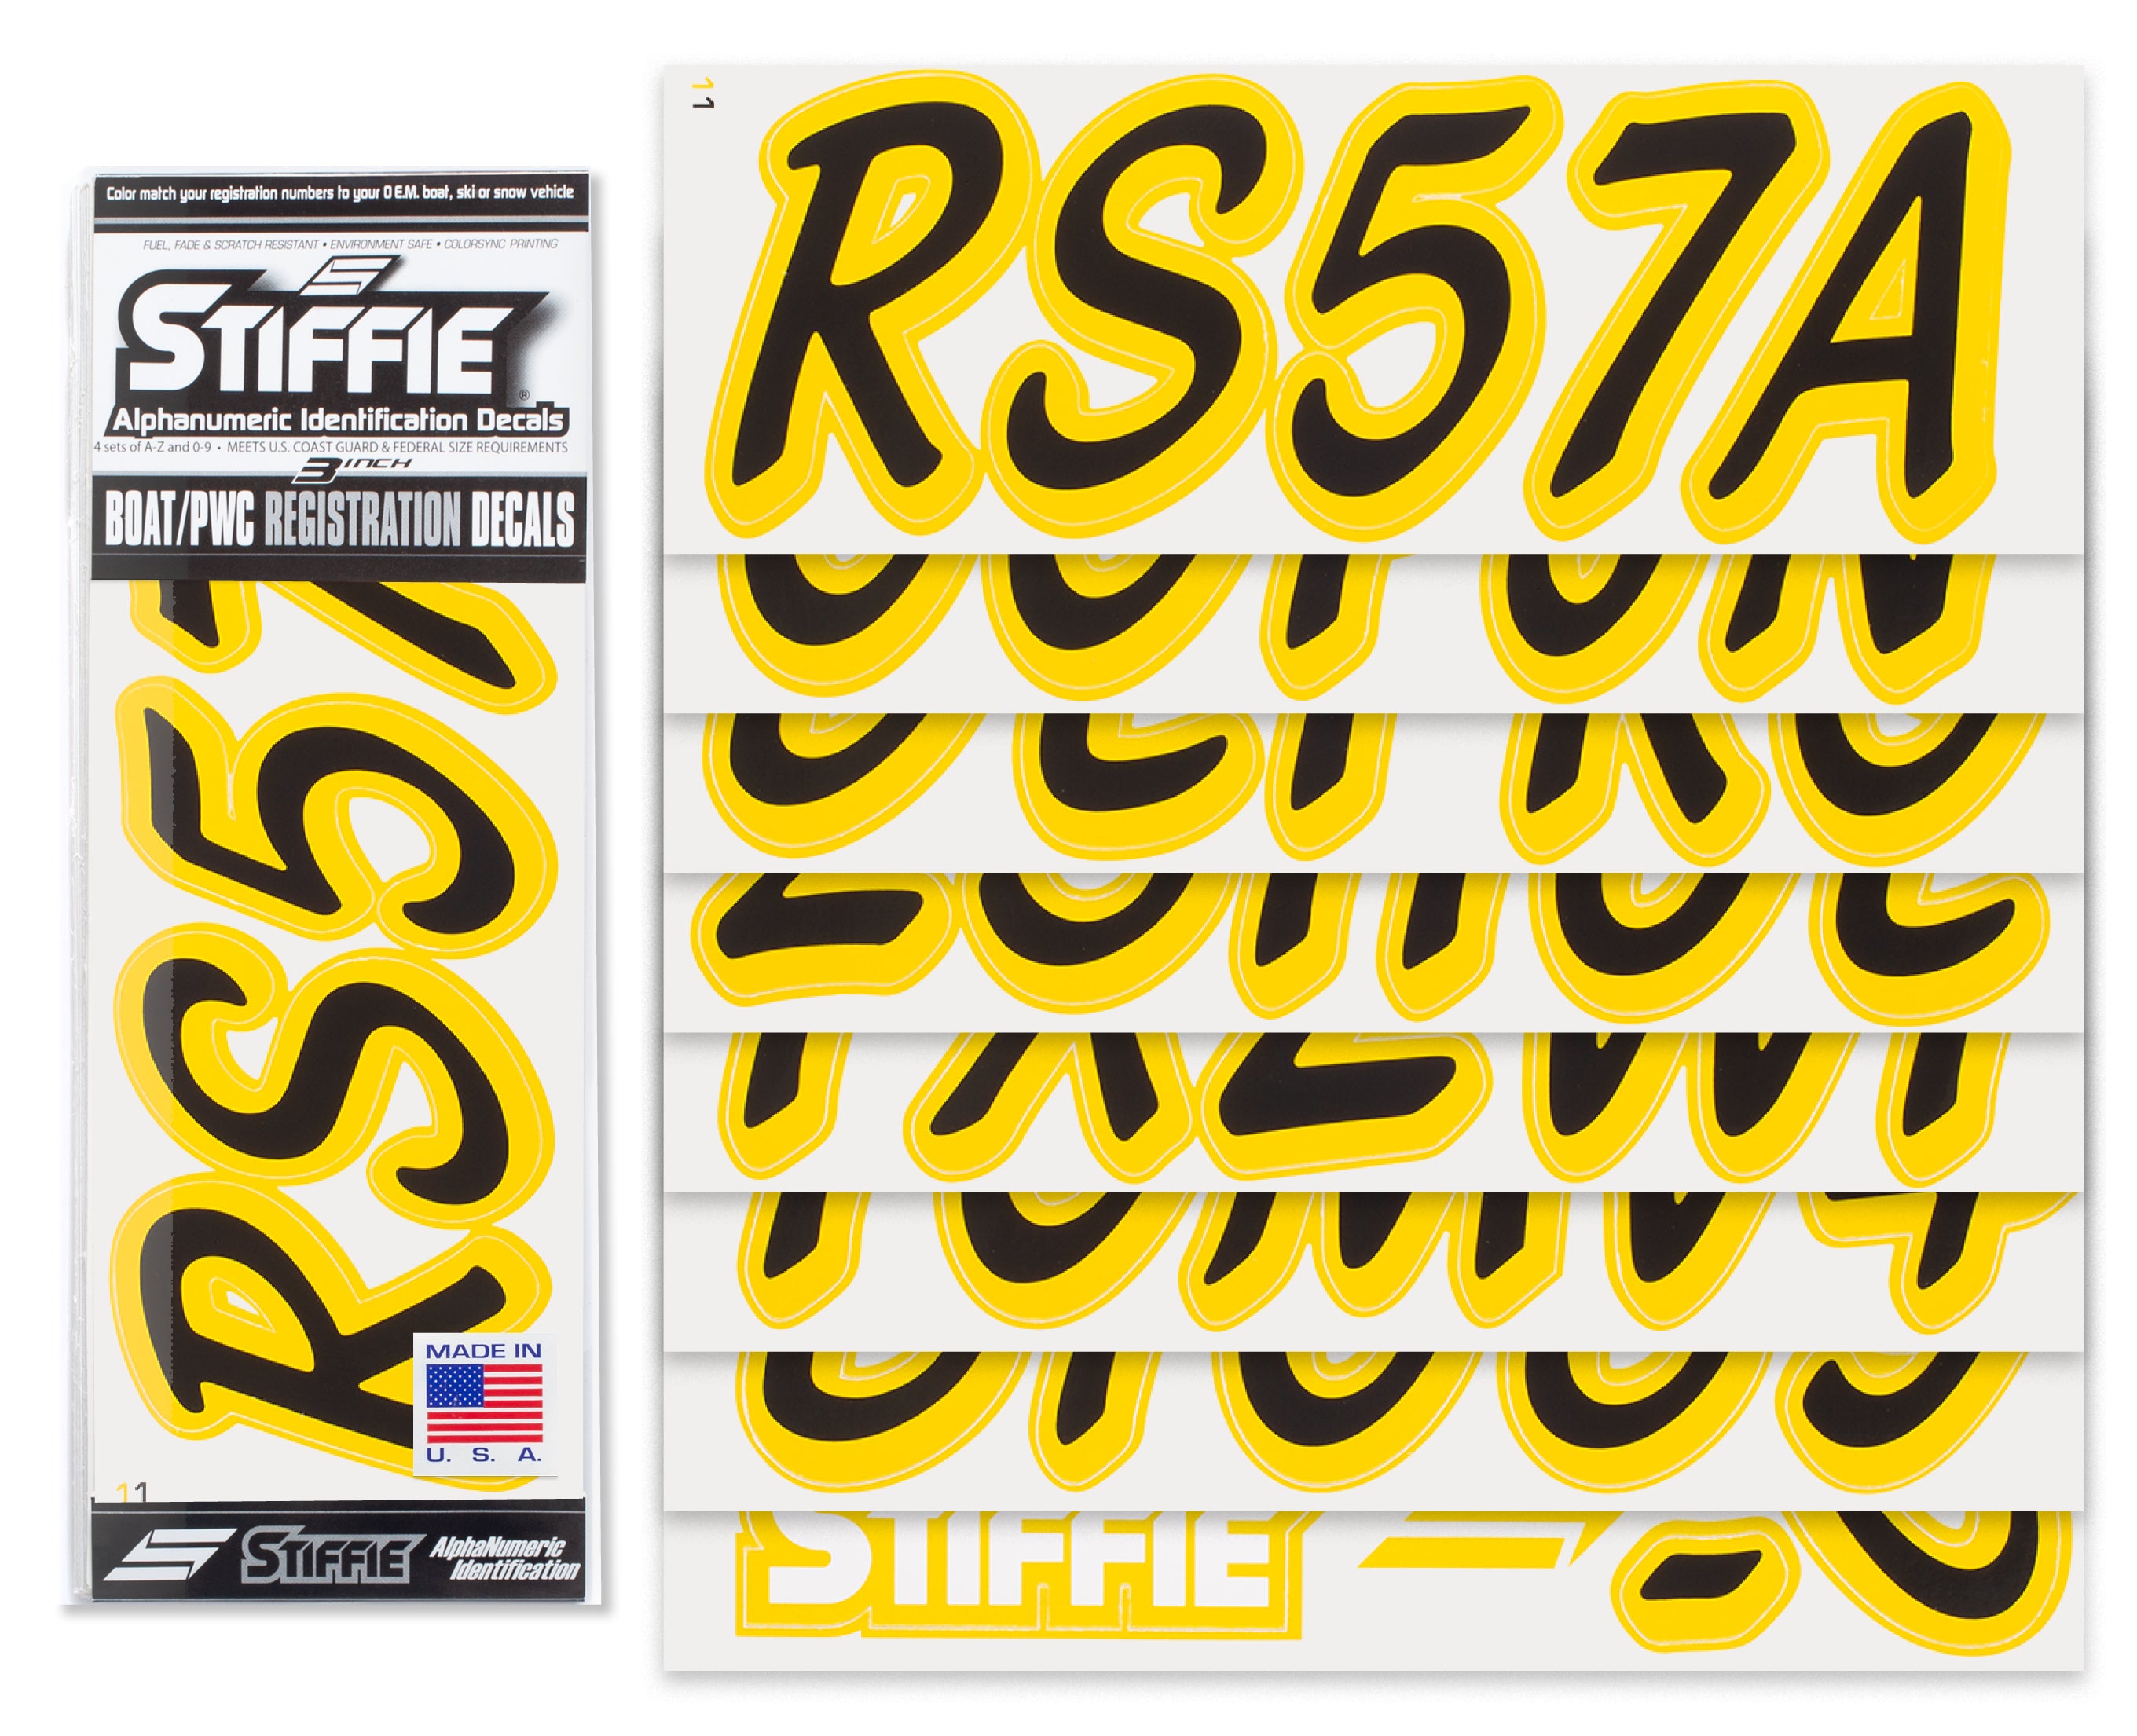 STIFFIE Whipline Solid Black/Yellow 3" Alpha-Numeric Registration Identification Numbers Stickers Decals for Boats & Personal Watercraft